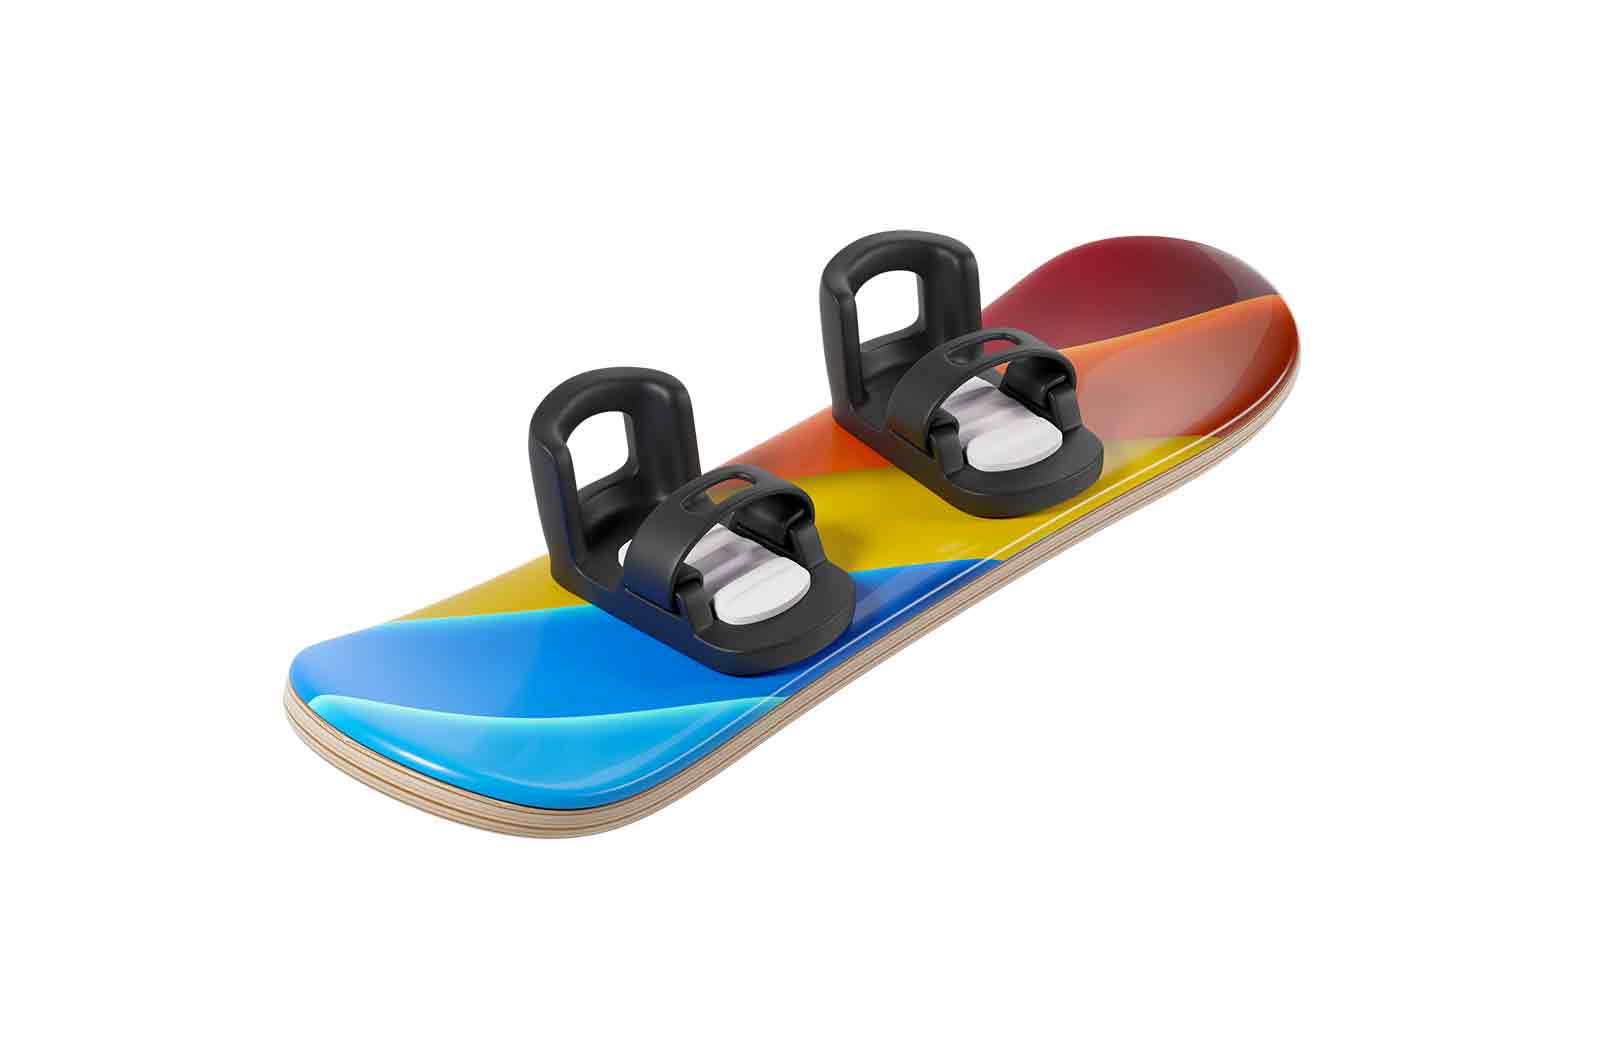 Ski snowboard equipment 3d rendered illustration. Snowboarding board. Seasonal leisure and winter sport and activity